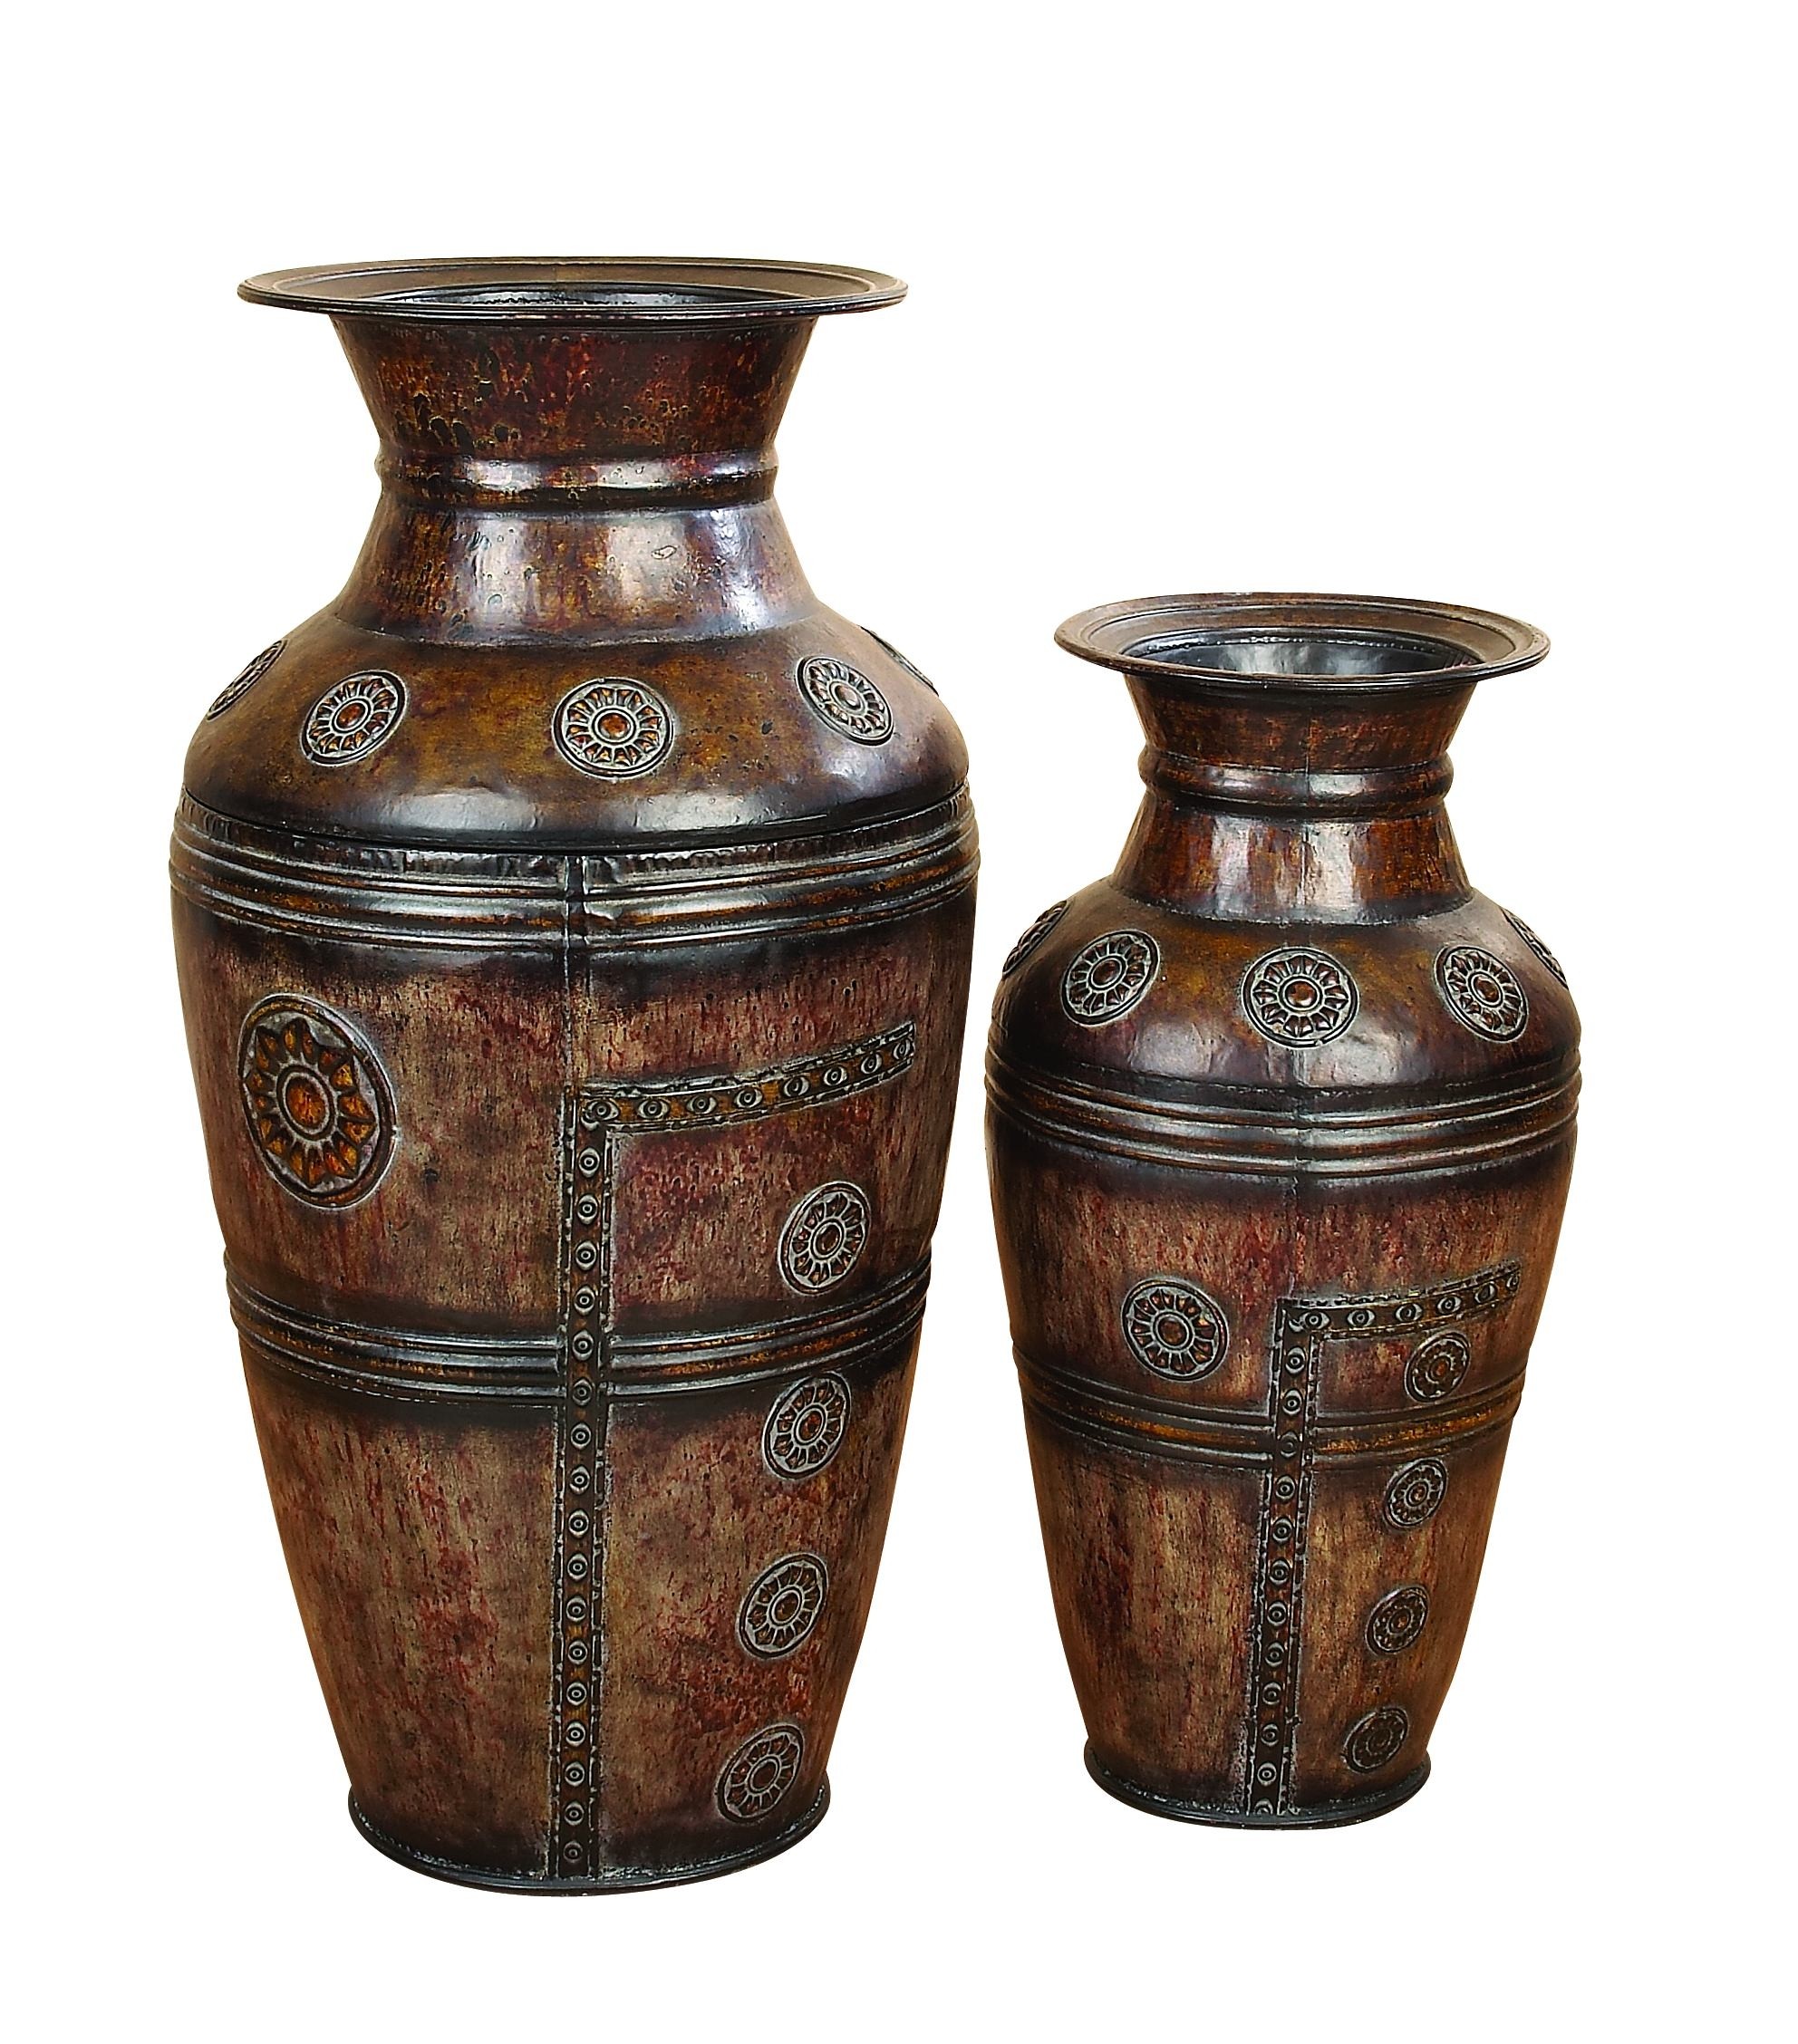 Banzara brown metal flower vases 29 and 22 tall matched